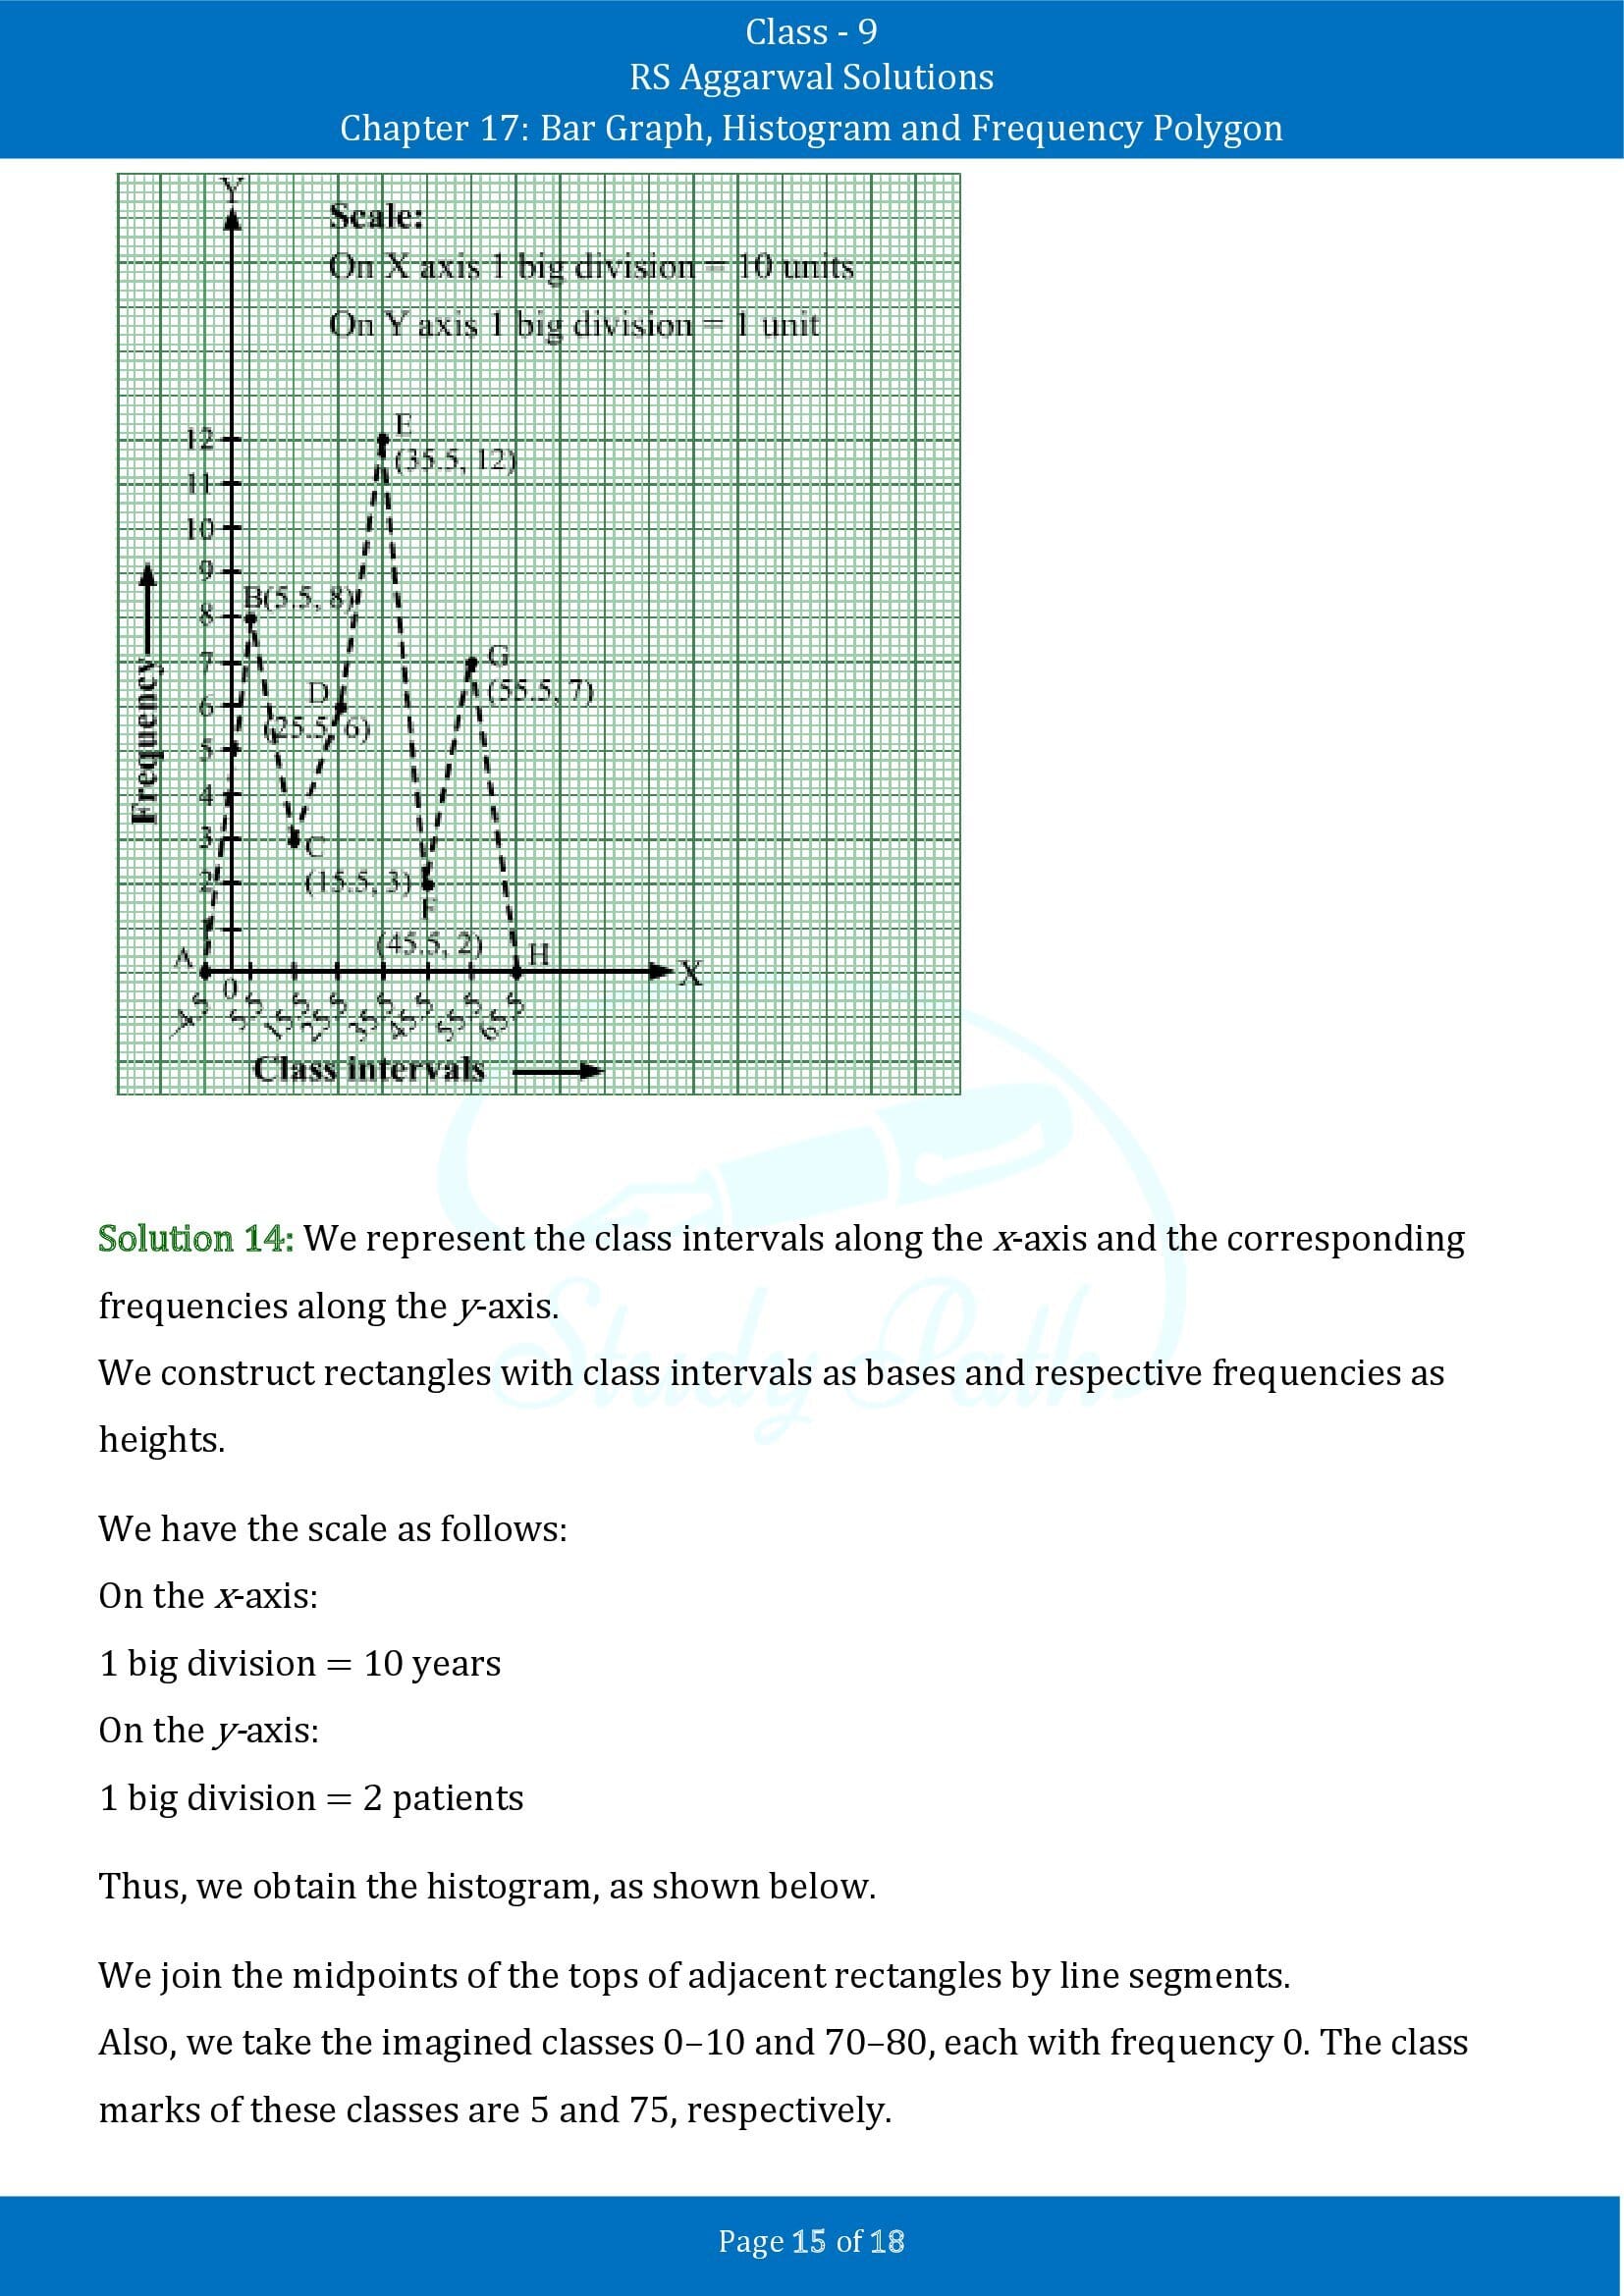 RS Aggarwal Solutions Class 9 Chapter 17 Bar Graph Histogram and Frequency Polygon Exercise 17B 00015